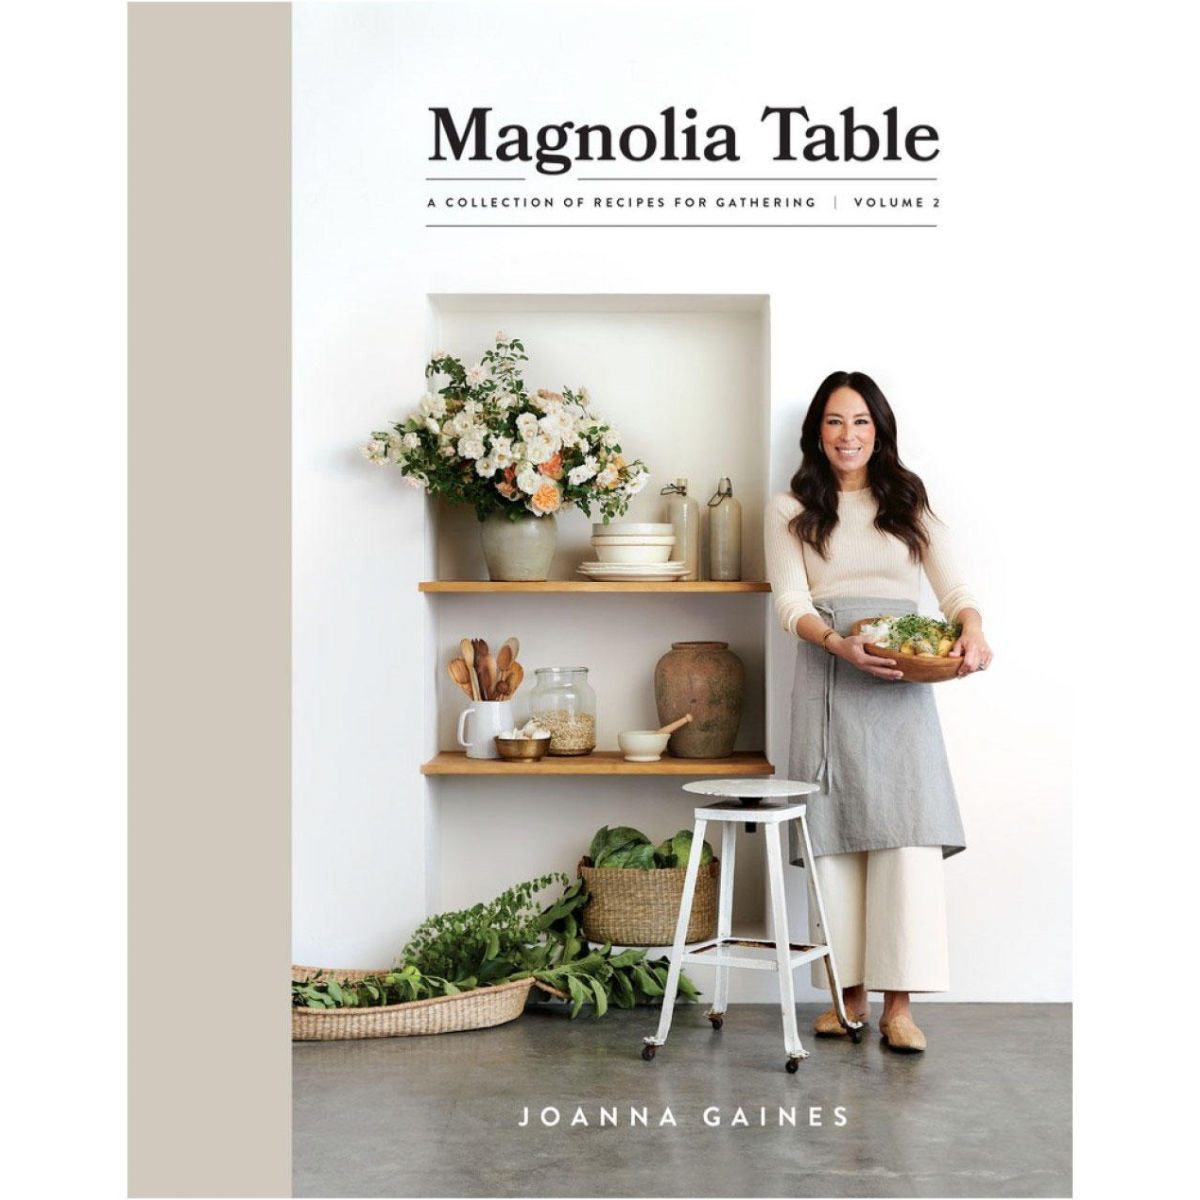 Magnolia Table A Collection of Recipes for Gathering Volume 2